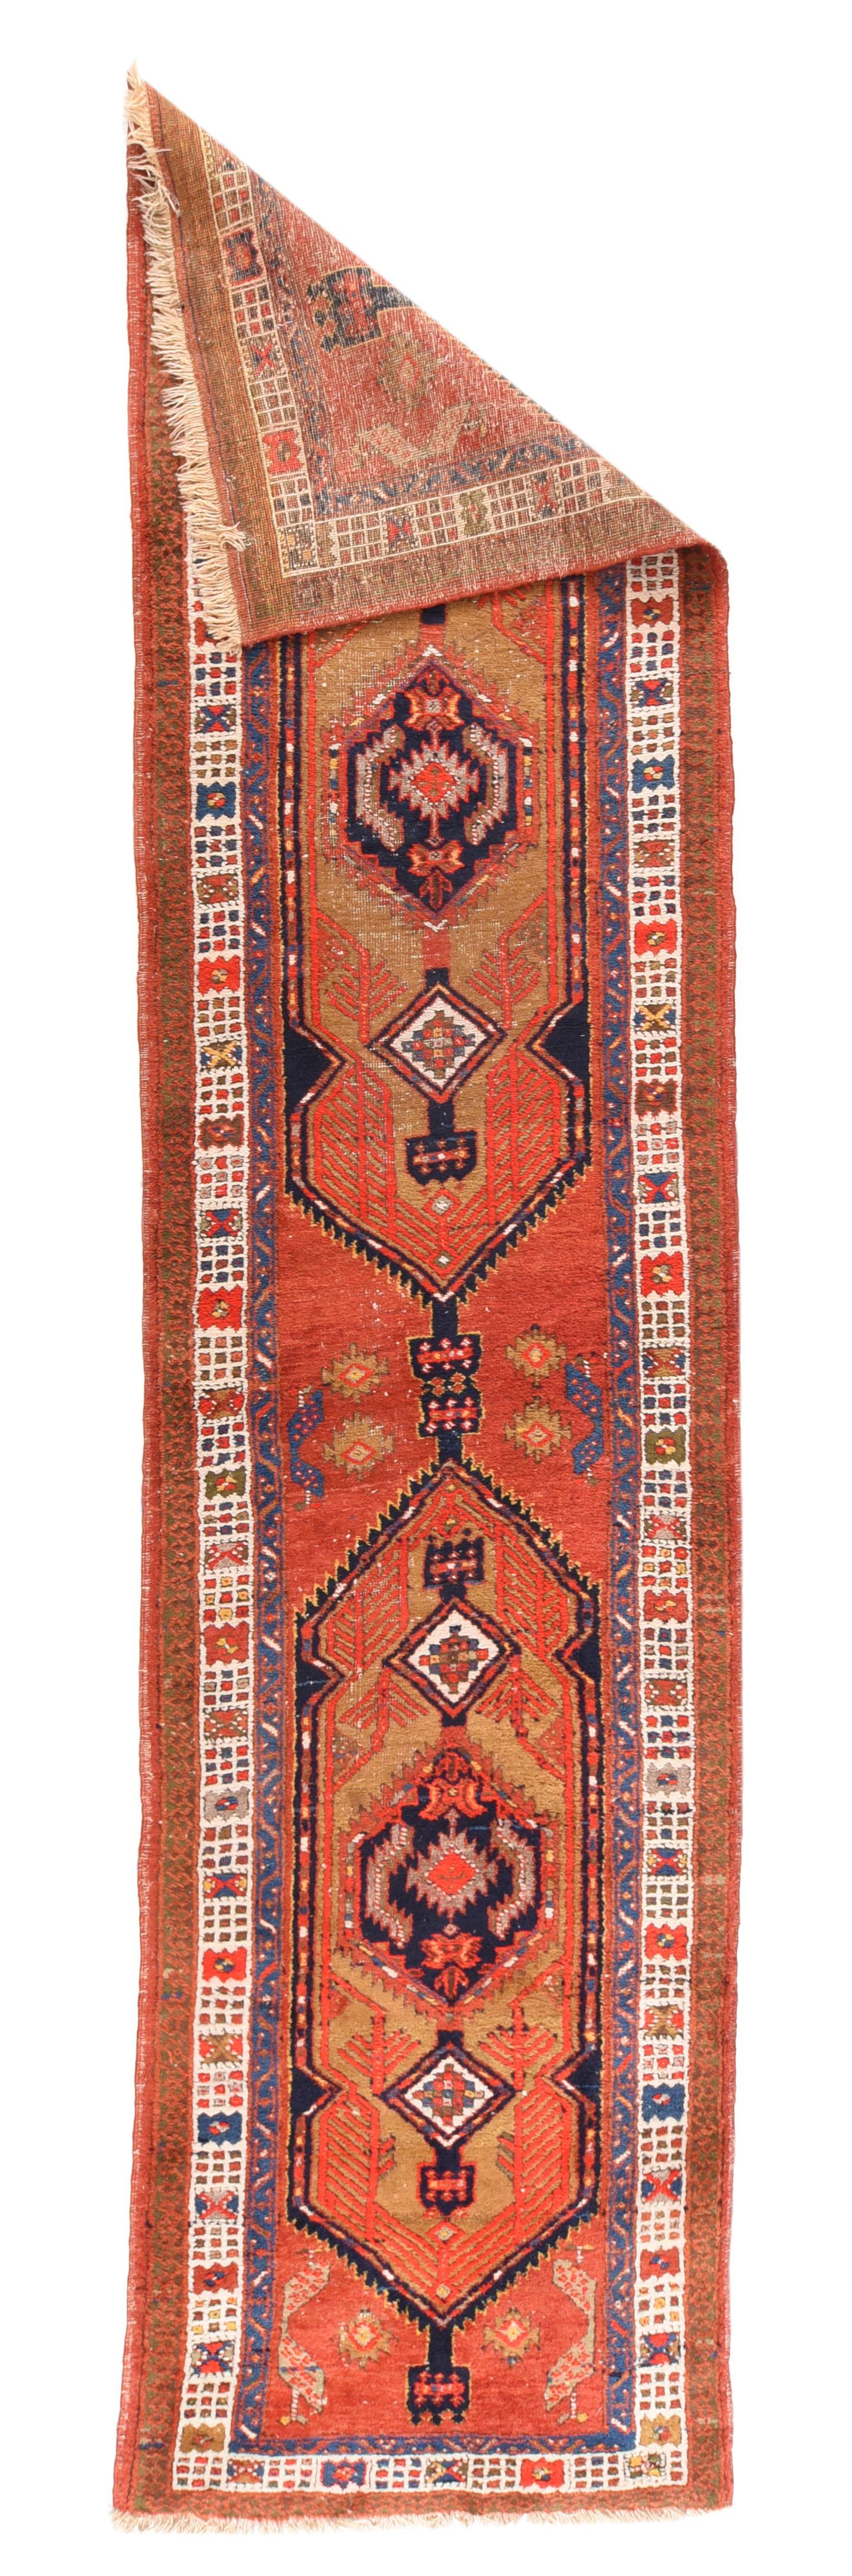 Vintage Heriz Runner 2'8'' x 11'8''. Heriz are one of the most unchanging of rustic Persian rugs, both in the general camel-tone palette and in the design of cartouche-format subfields with, pendanted have hexagonal medallions. Here we have a two